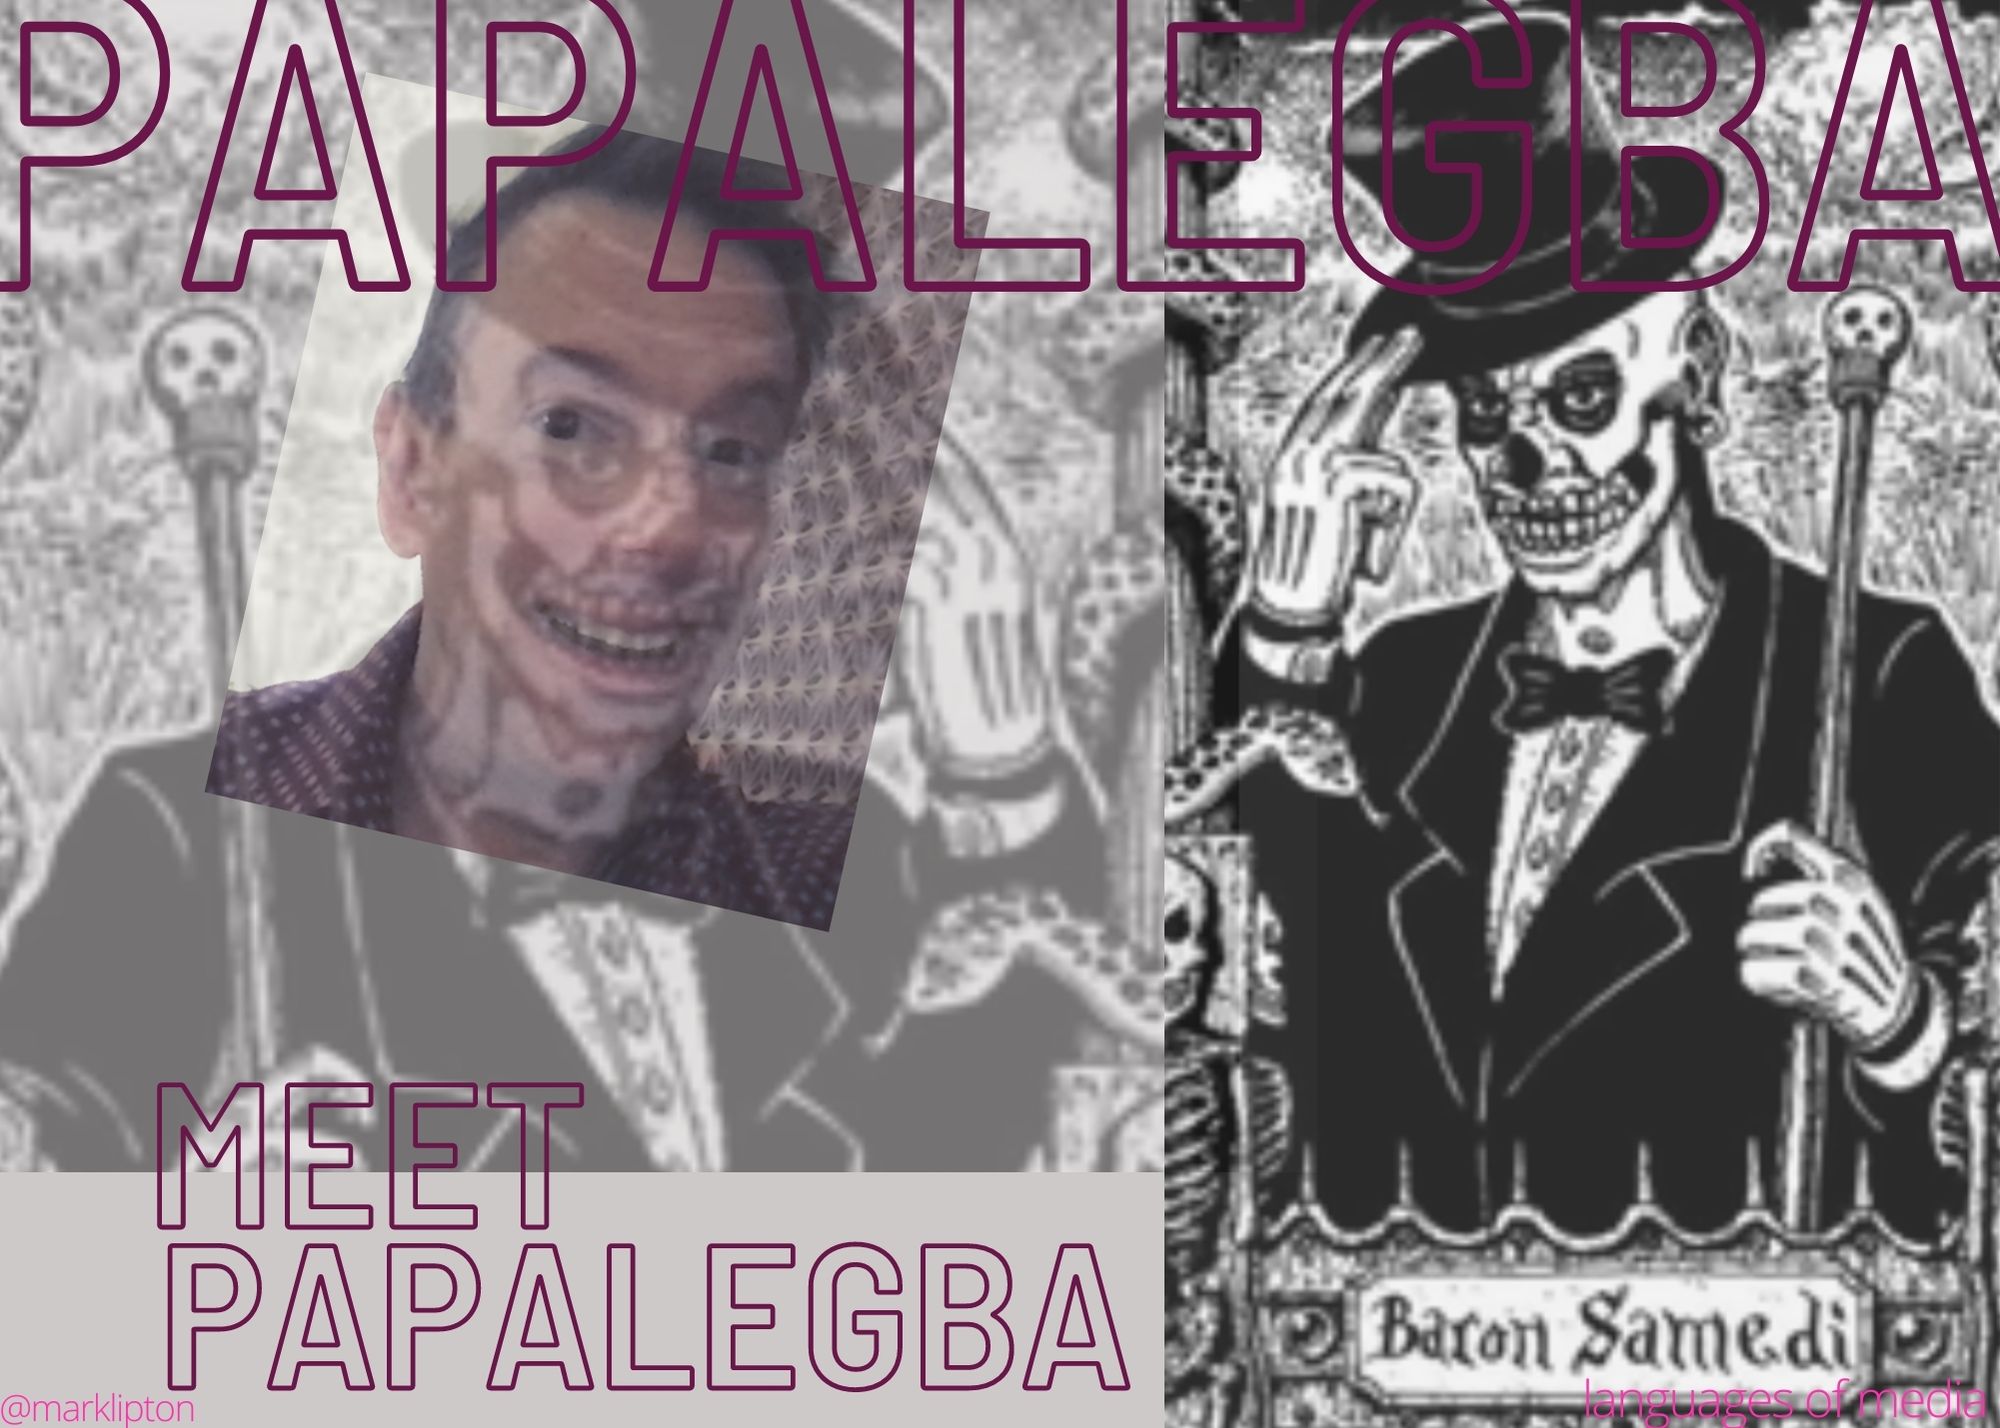 image: PAPALEGBA: mirror images of Baron Samedi, the Haitian Voodoo God of the crossroads. A skeleton wearing a tuxedo and top hat, tips his hat to those who hesitate. Meet PAPALEGBA; in one mirror image, Professor Lipton's face is superimposed over the skull of PAPALEGBA.]